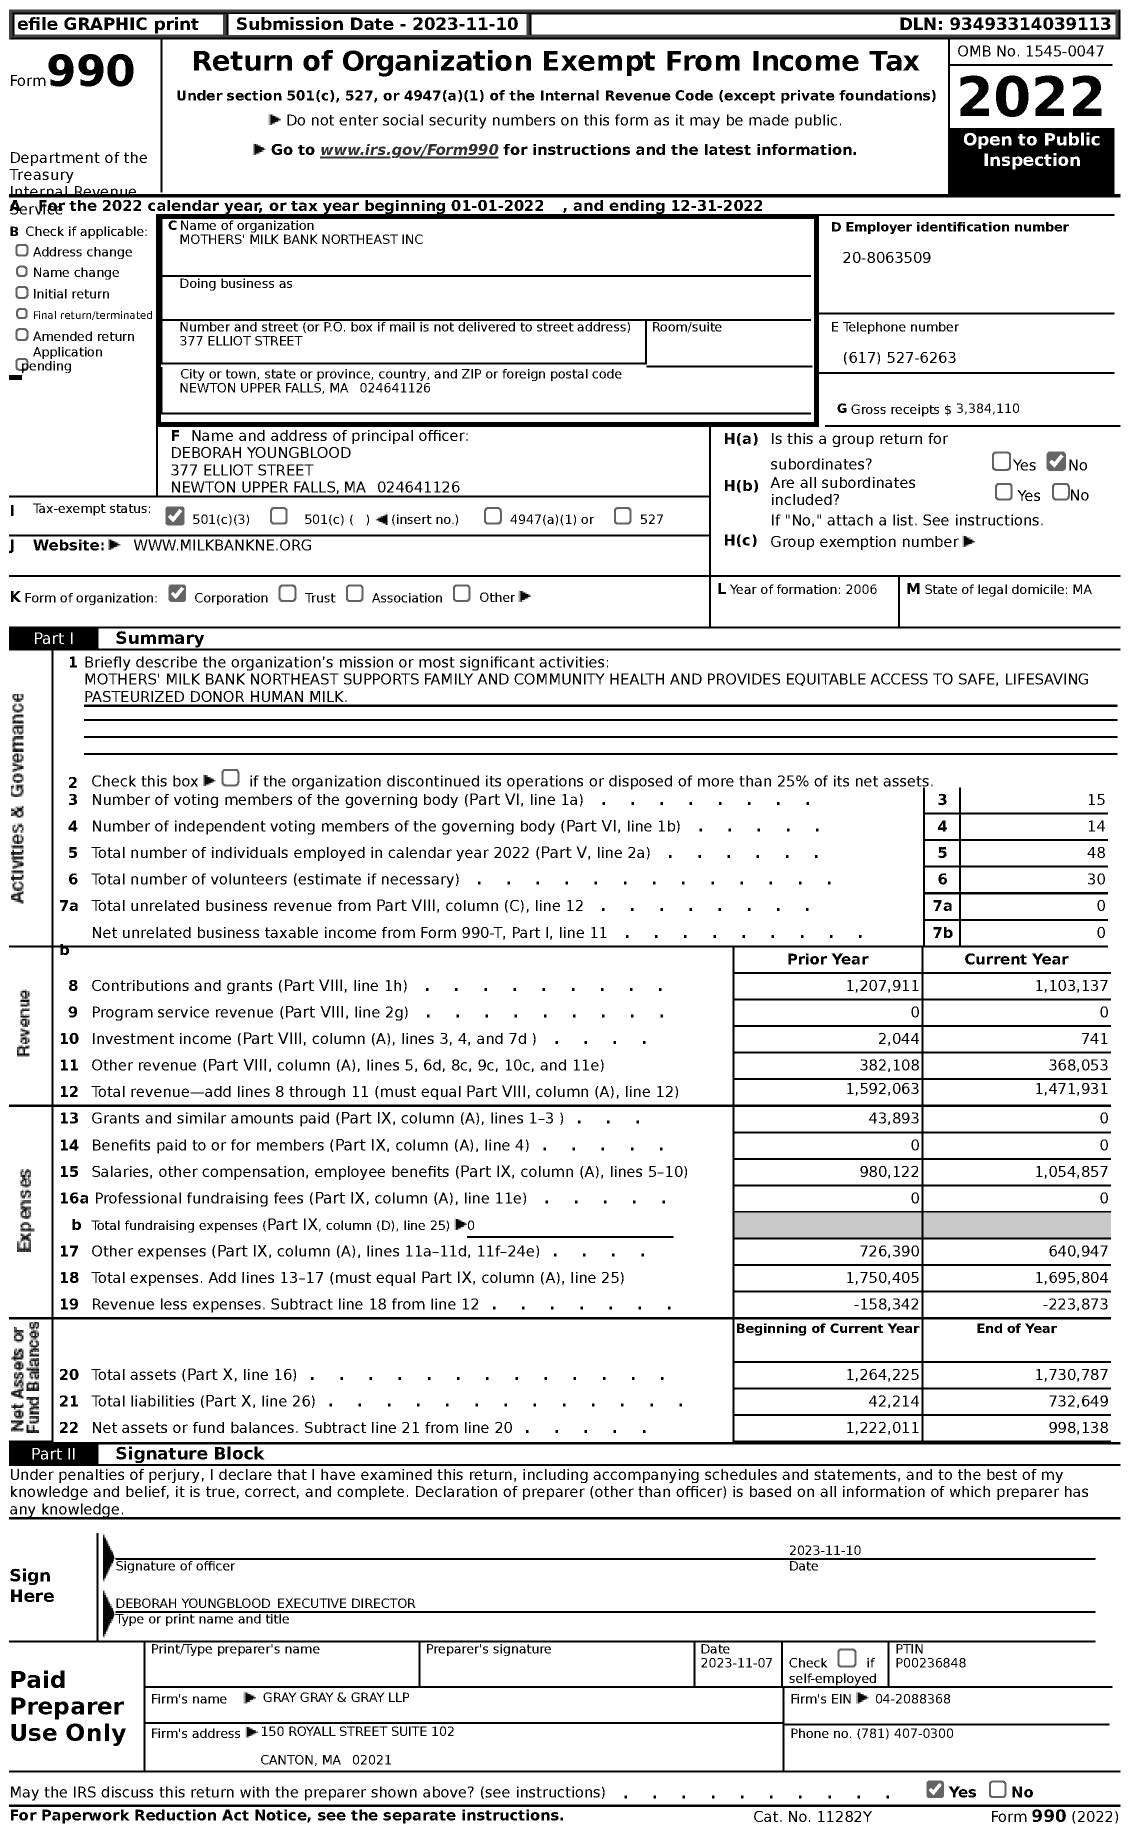 Image of first page of 2022 Form 990 for Mothers' Milk Bank Northeast